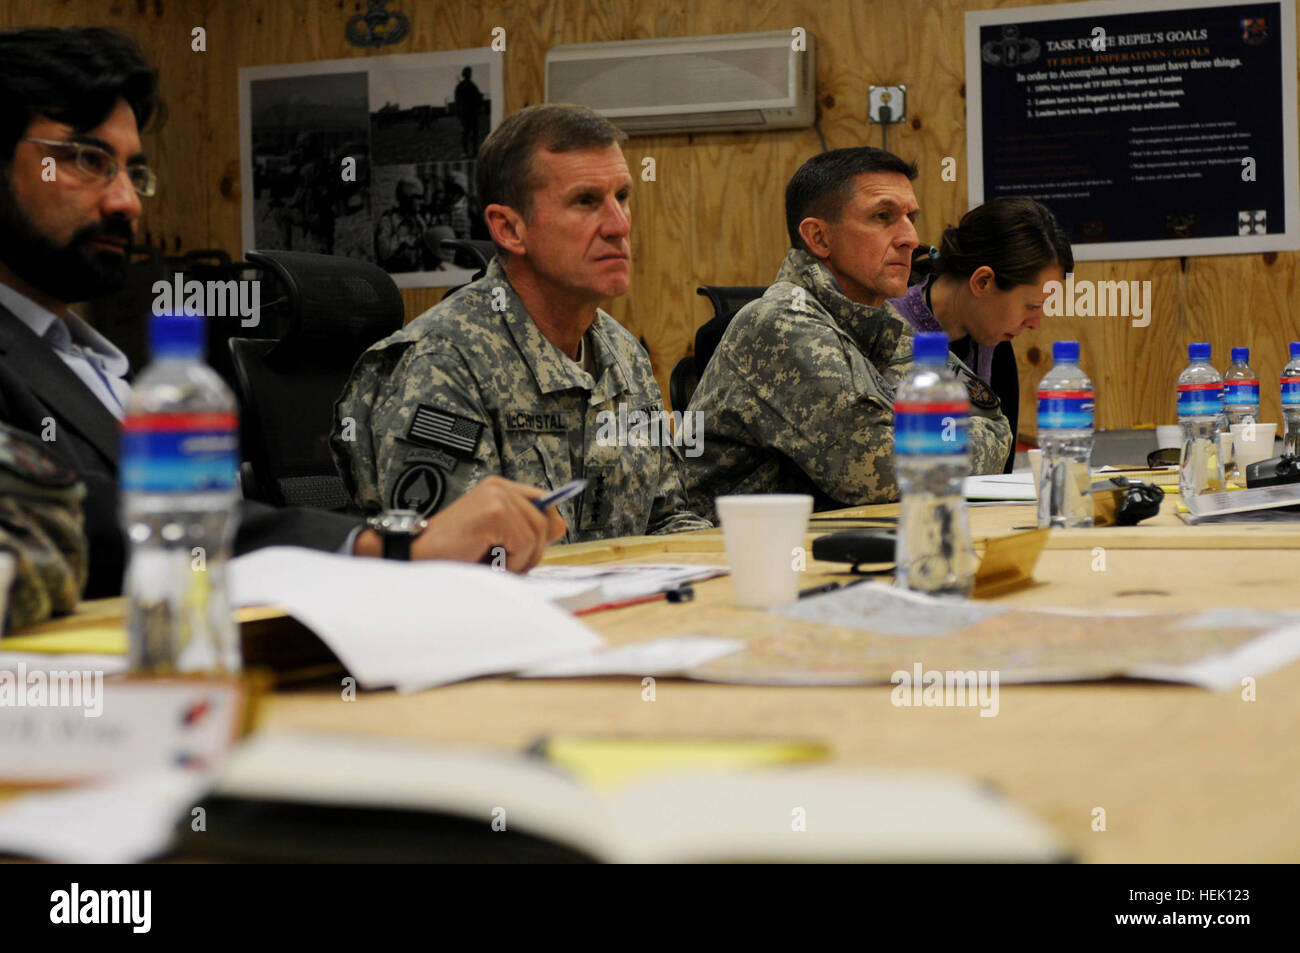 100310-A-0884S-001: LOGAR PROVINCE, Afghanistan – U.S. Army Gen. Stanley McChrystal, commander of International Security Assistance Force, with U.S. Army Maj. Gen. Michael T. Flynn, chief of intelligence for ISAF, listen to a briefing by 173rd Airborne Brigade Combat Team commander, U.S. Army Col. James Johnson, during a visit to Forward Operating Base Shank, March 10.  McChrystal also spoke during the meeting, discussing current operations and the future of the counter-insurgency fight in Afghanistan.  “We’re herenot to fight the war, but we’re here to win,” said McChrystal.  “And we win thro Stock Photo